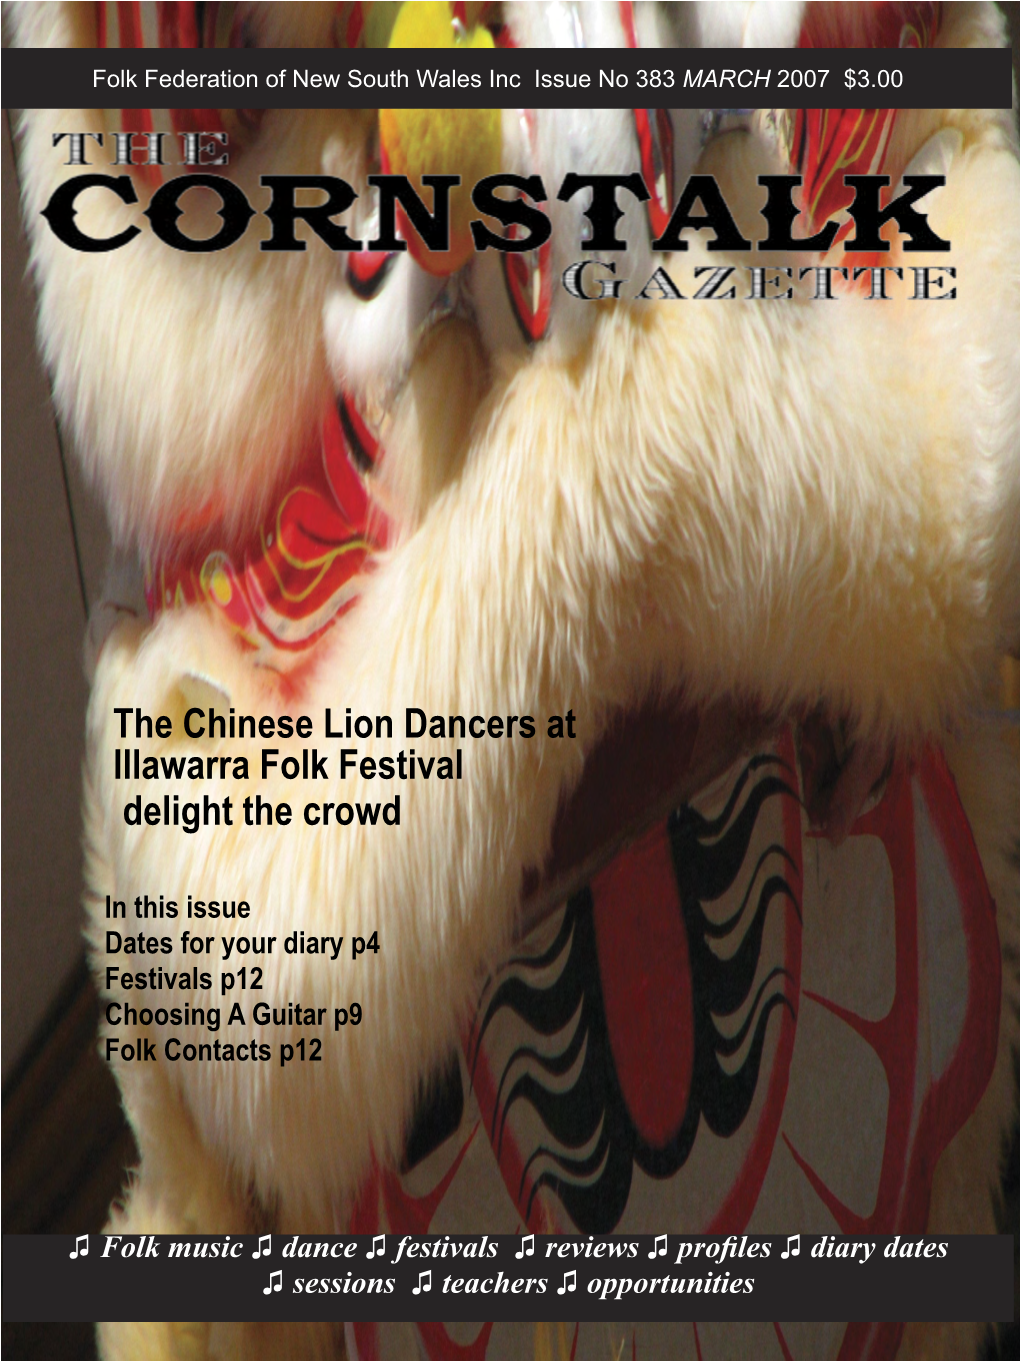 March 07 Cornstalk Issue 383A.Indd